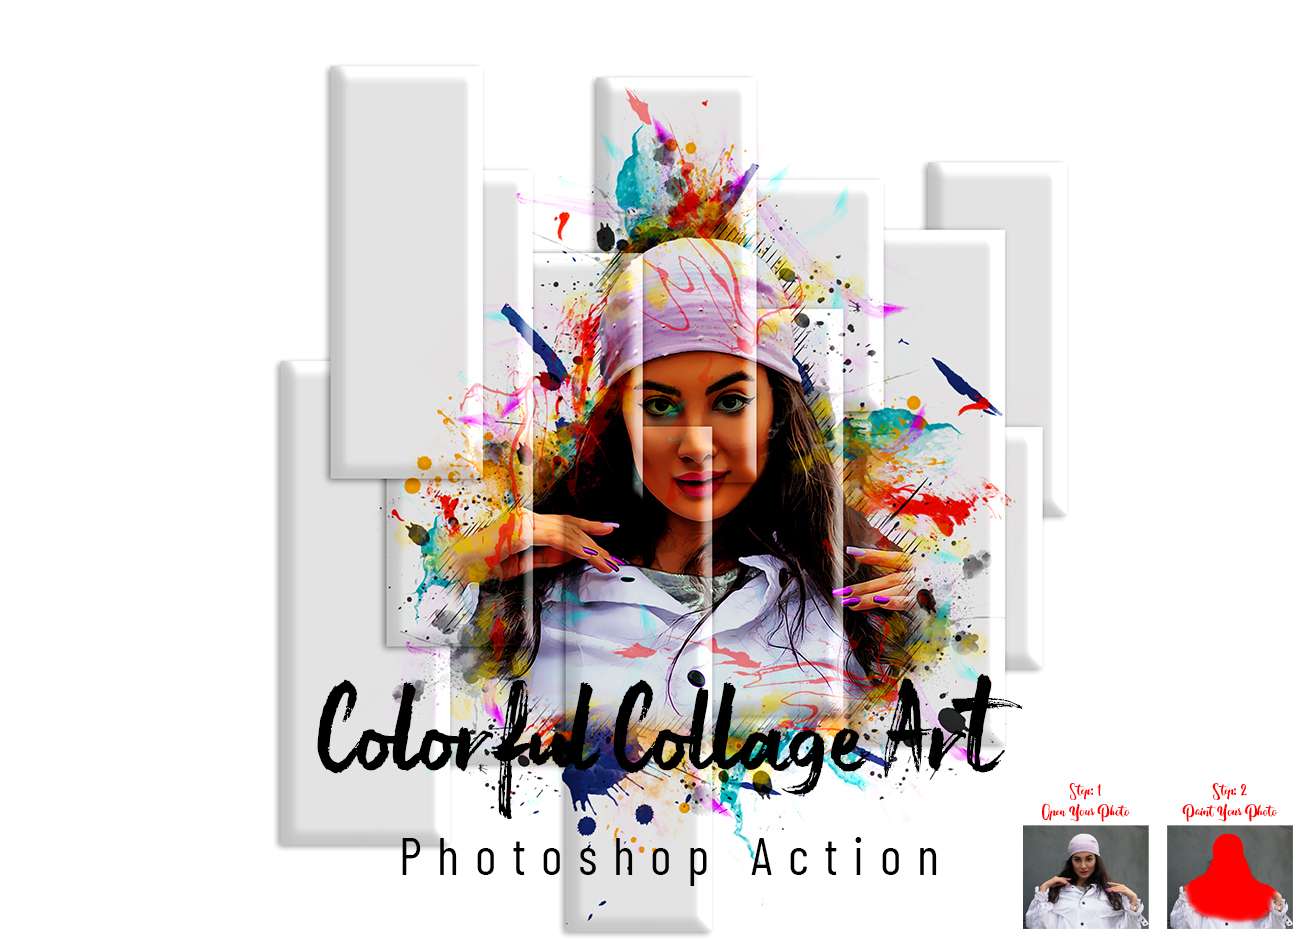 Colorful Collage Art PS Action